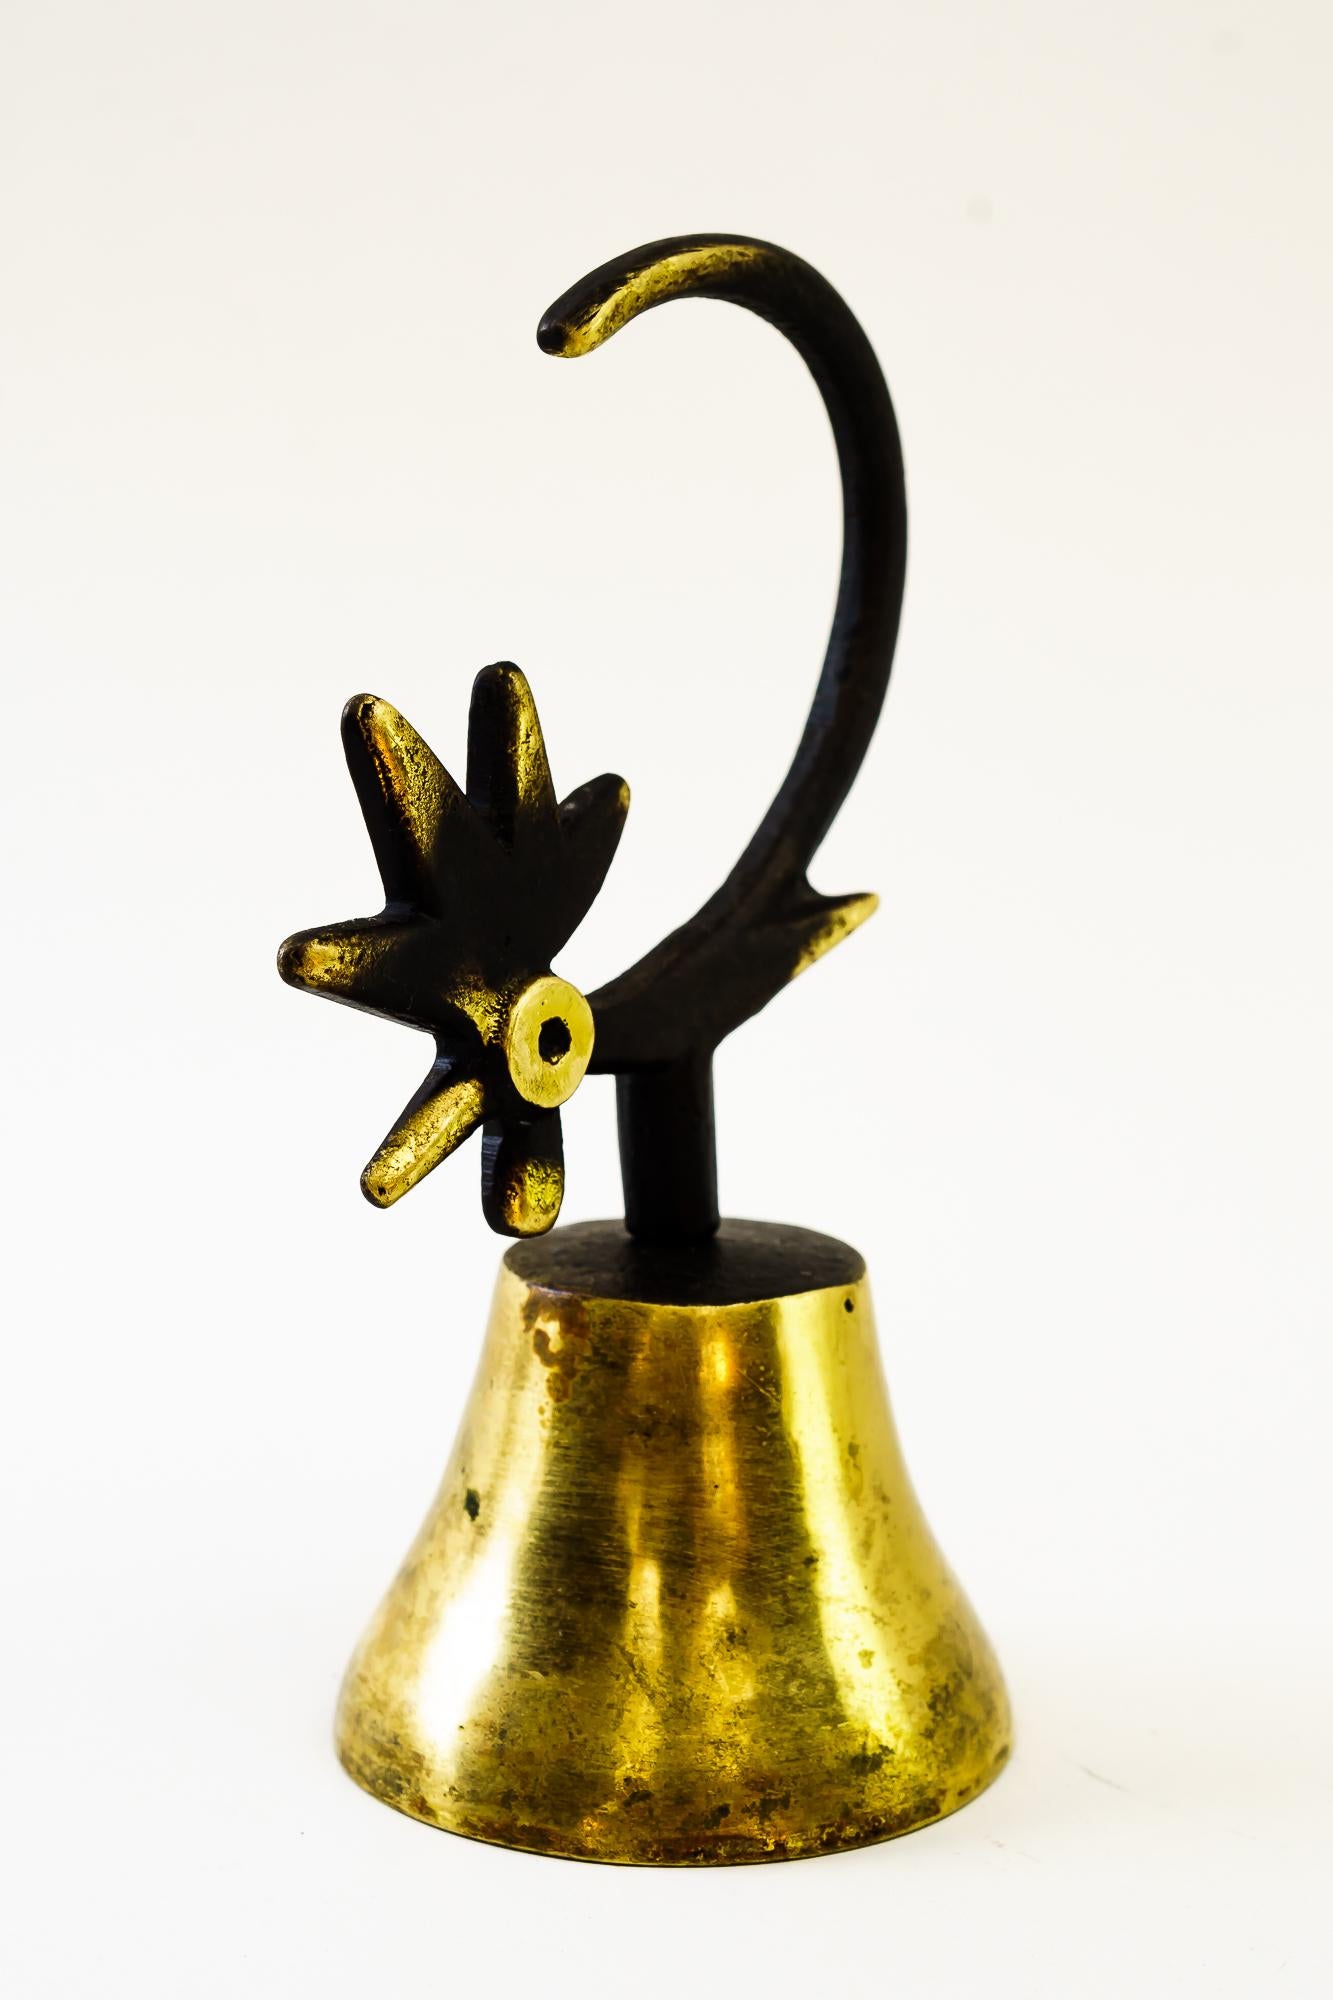 Walter Bosse Rooster dinner bell, 1950s
Original condition.